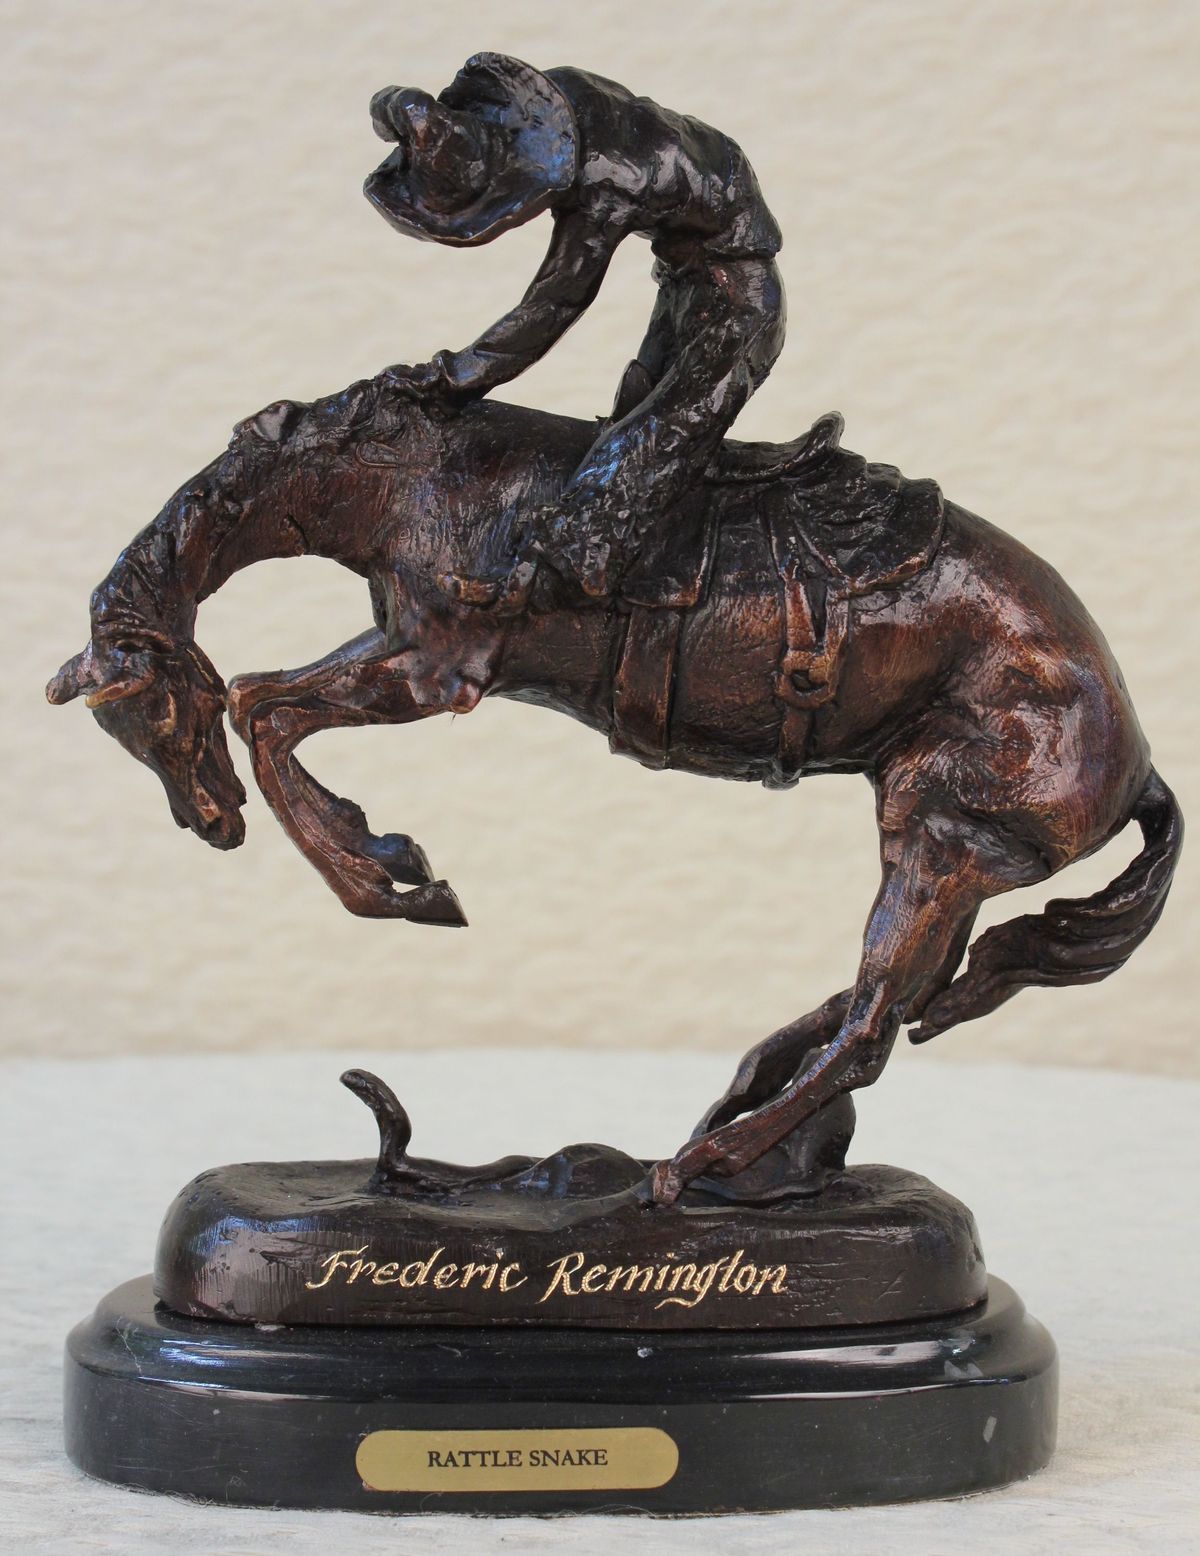 BRONZE FREDERIC REMINGTON RATTLESNAKE SCULPTURE STATUE COLLECTIBLE NEW FIGURINE